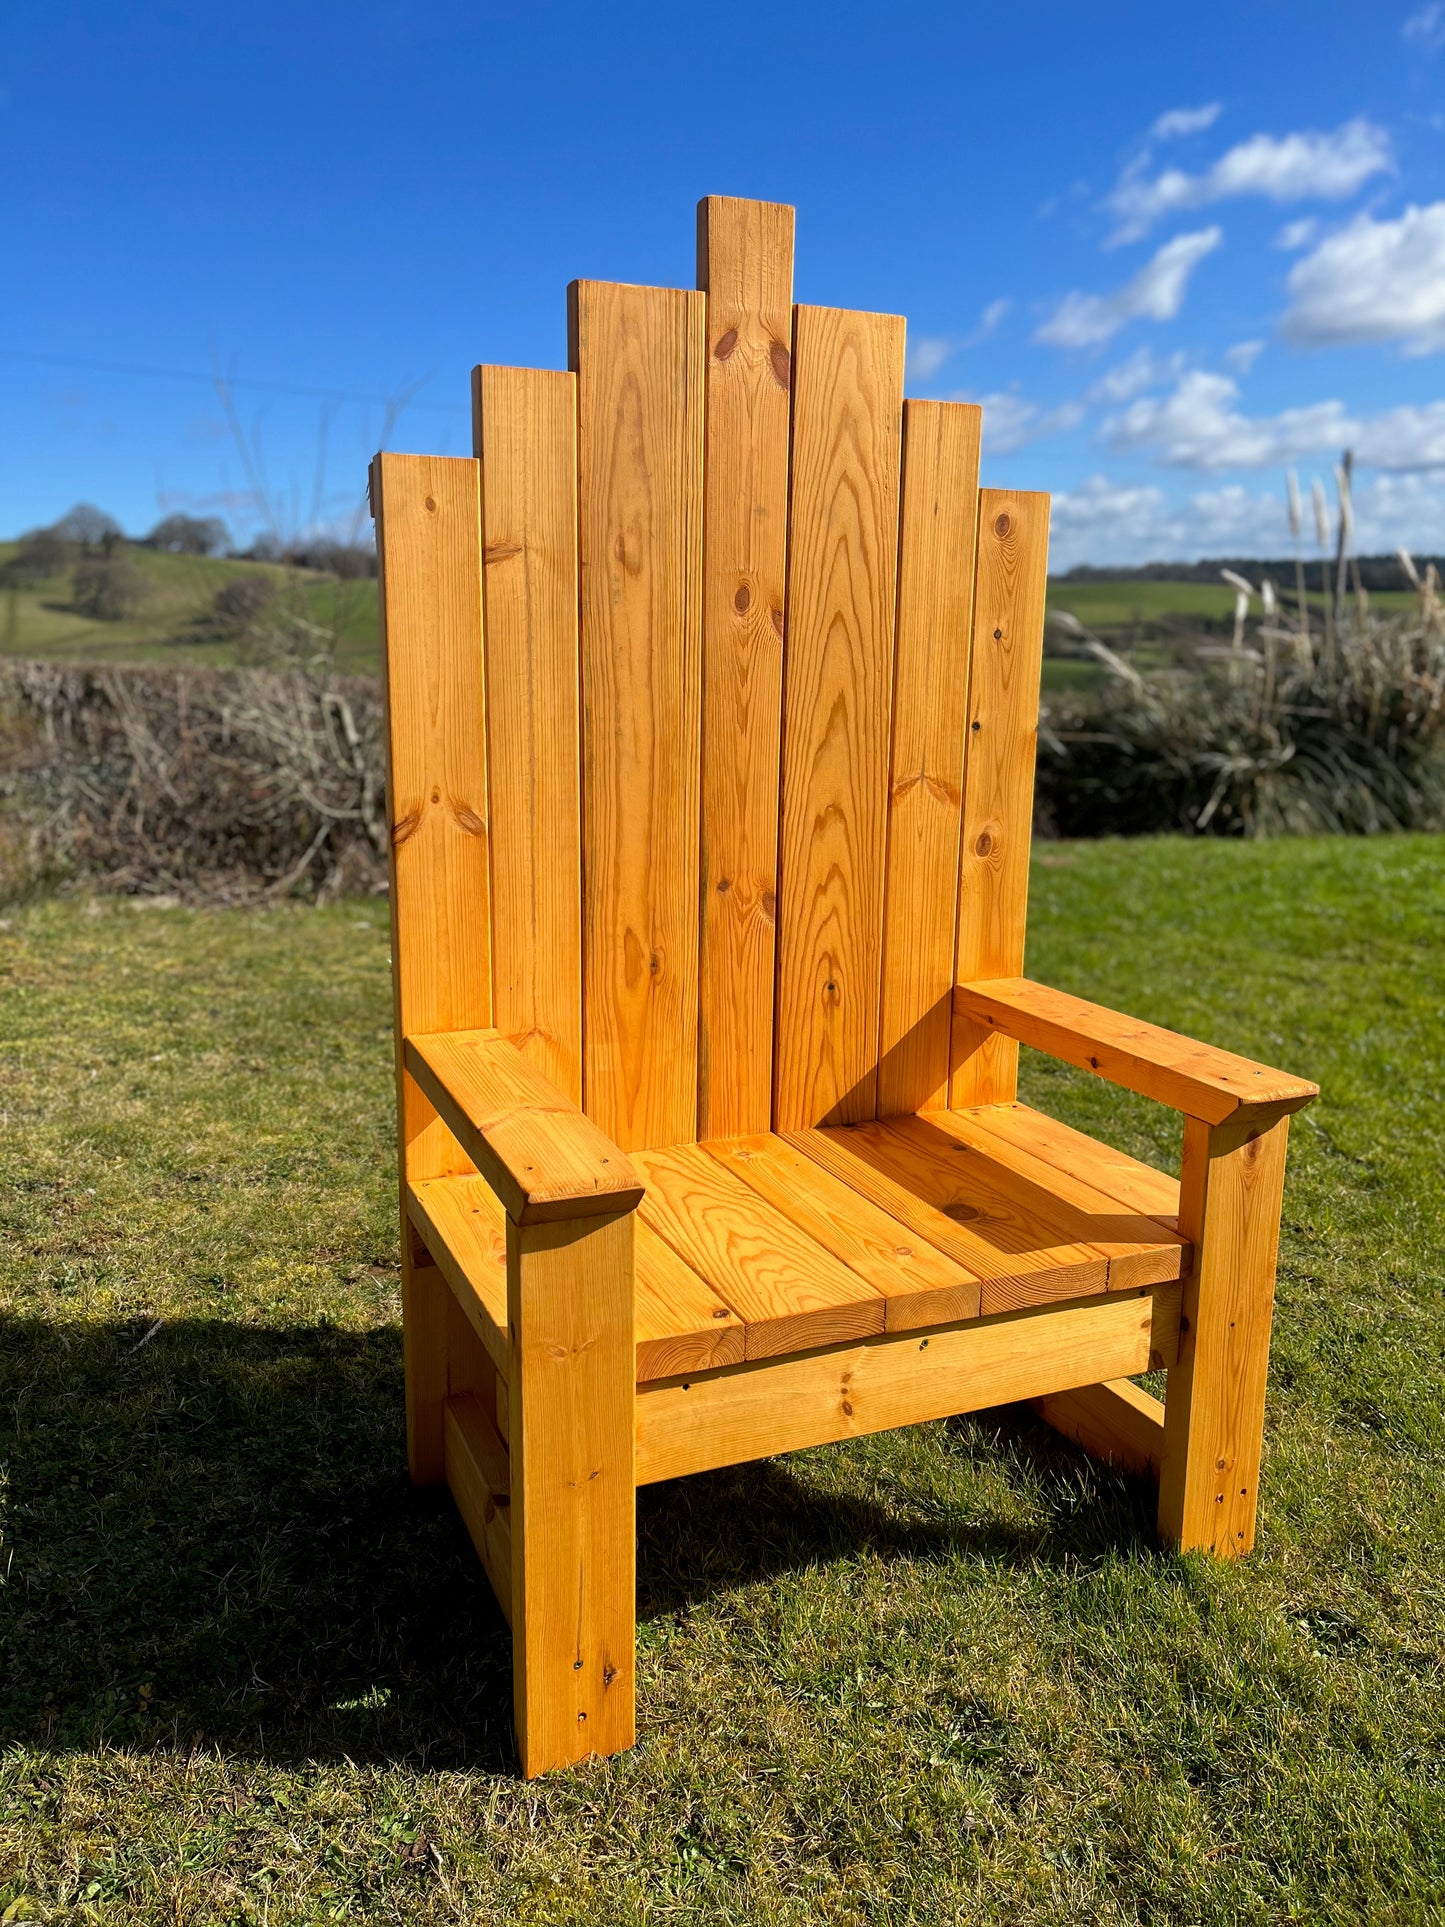 Story-telling Chair/Throne